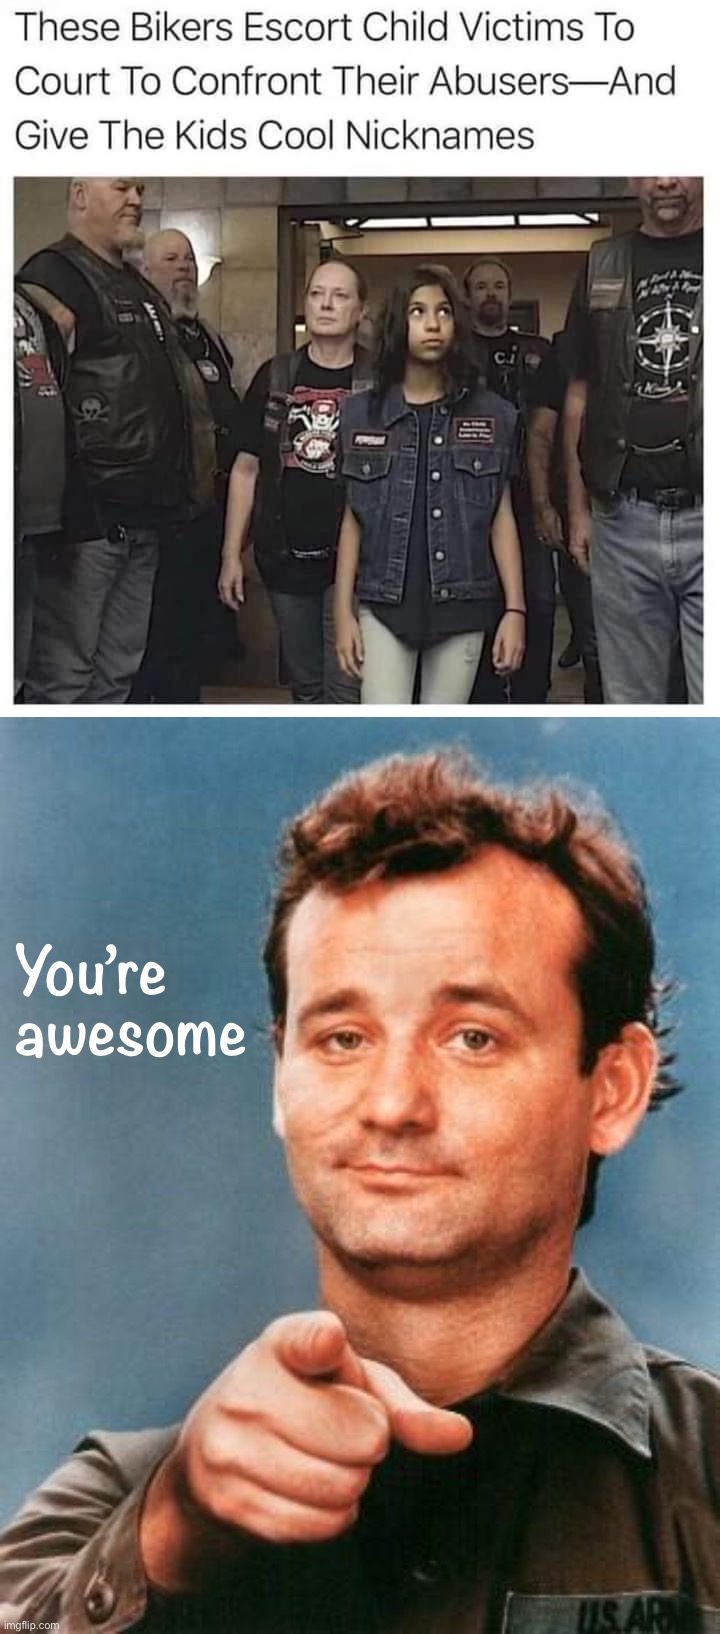 Just badasses fighting misogyny and abuse. | You’re awesome | image tagged in bikers escort abuse victims,bill murray you're awesome,sexism,sexist,abuse,child abuse | made w/ Imgflip meme maker